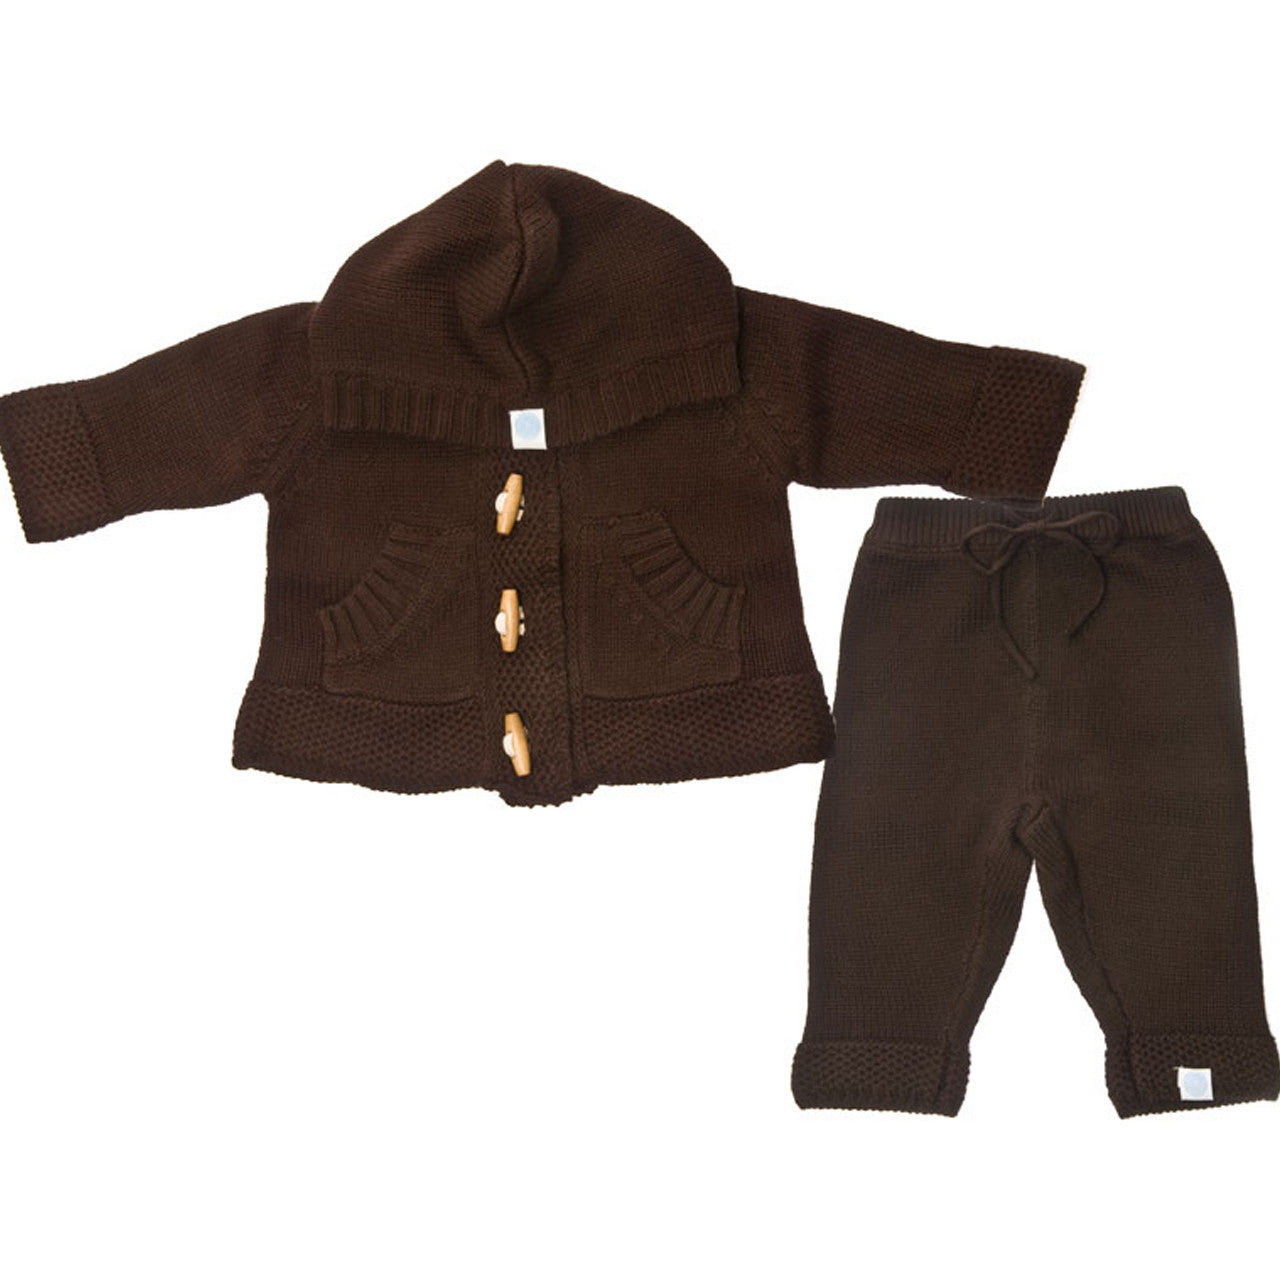 Knit Hoodie & Pant Set Brown Baby Clothes